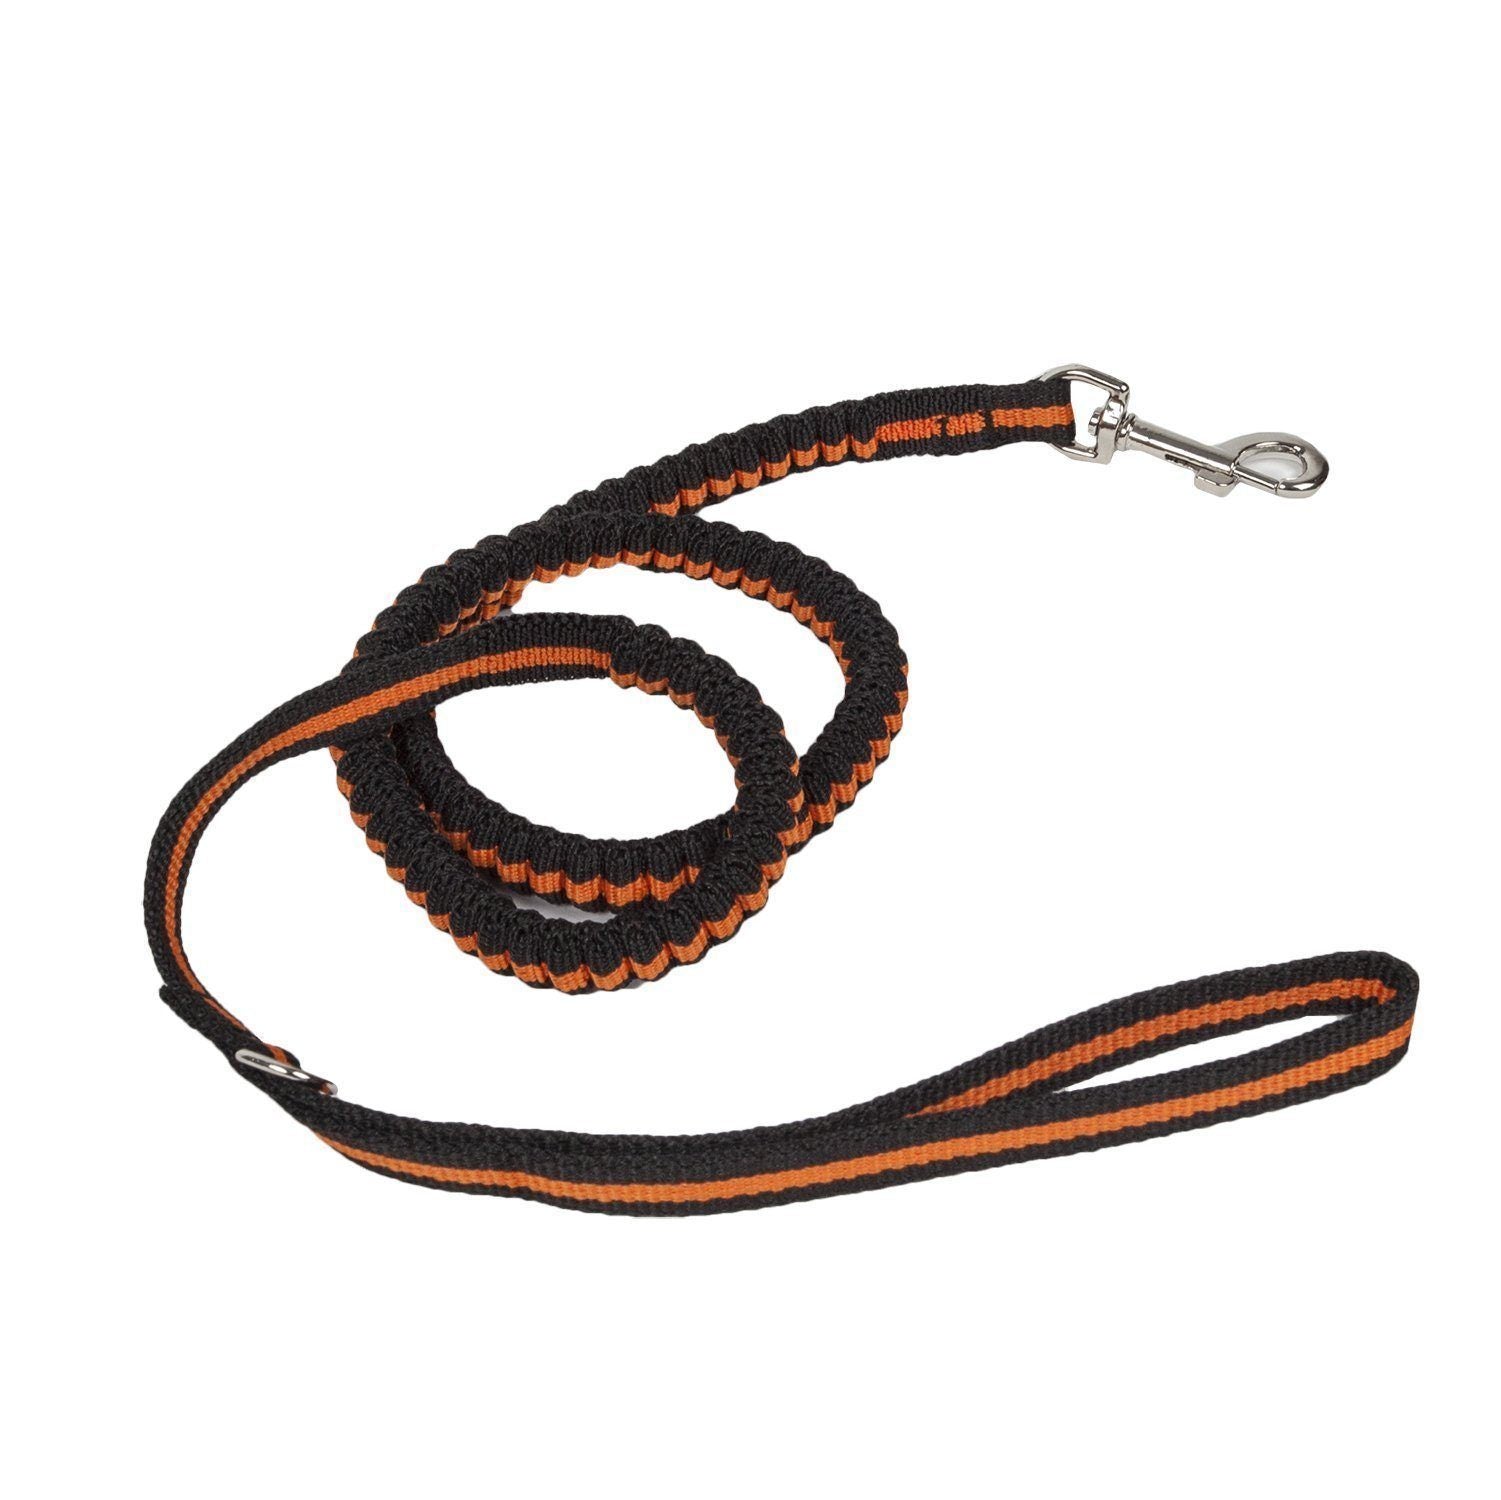 Pet Life ® 'Retract-A-Wag' Shock Absorption Stitched Durable Pet Dog Leash Orange 